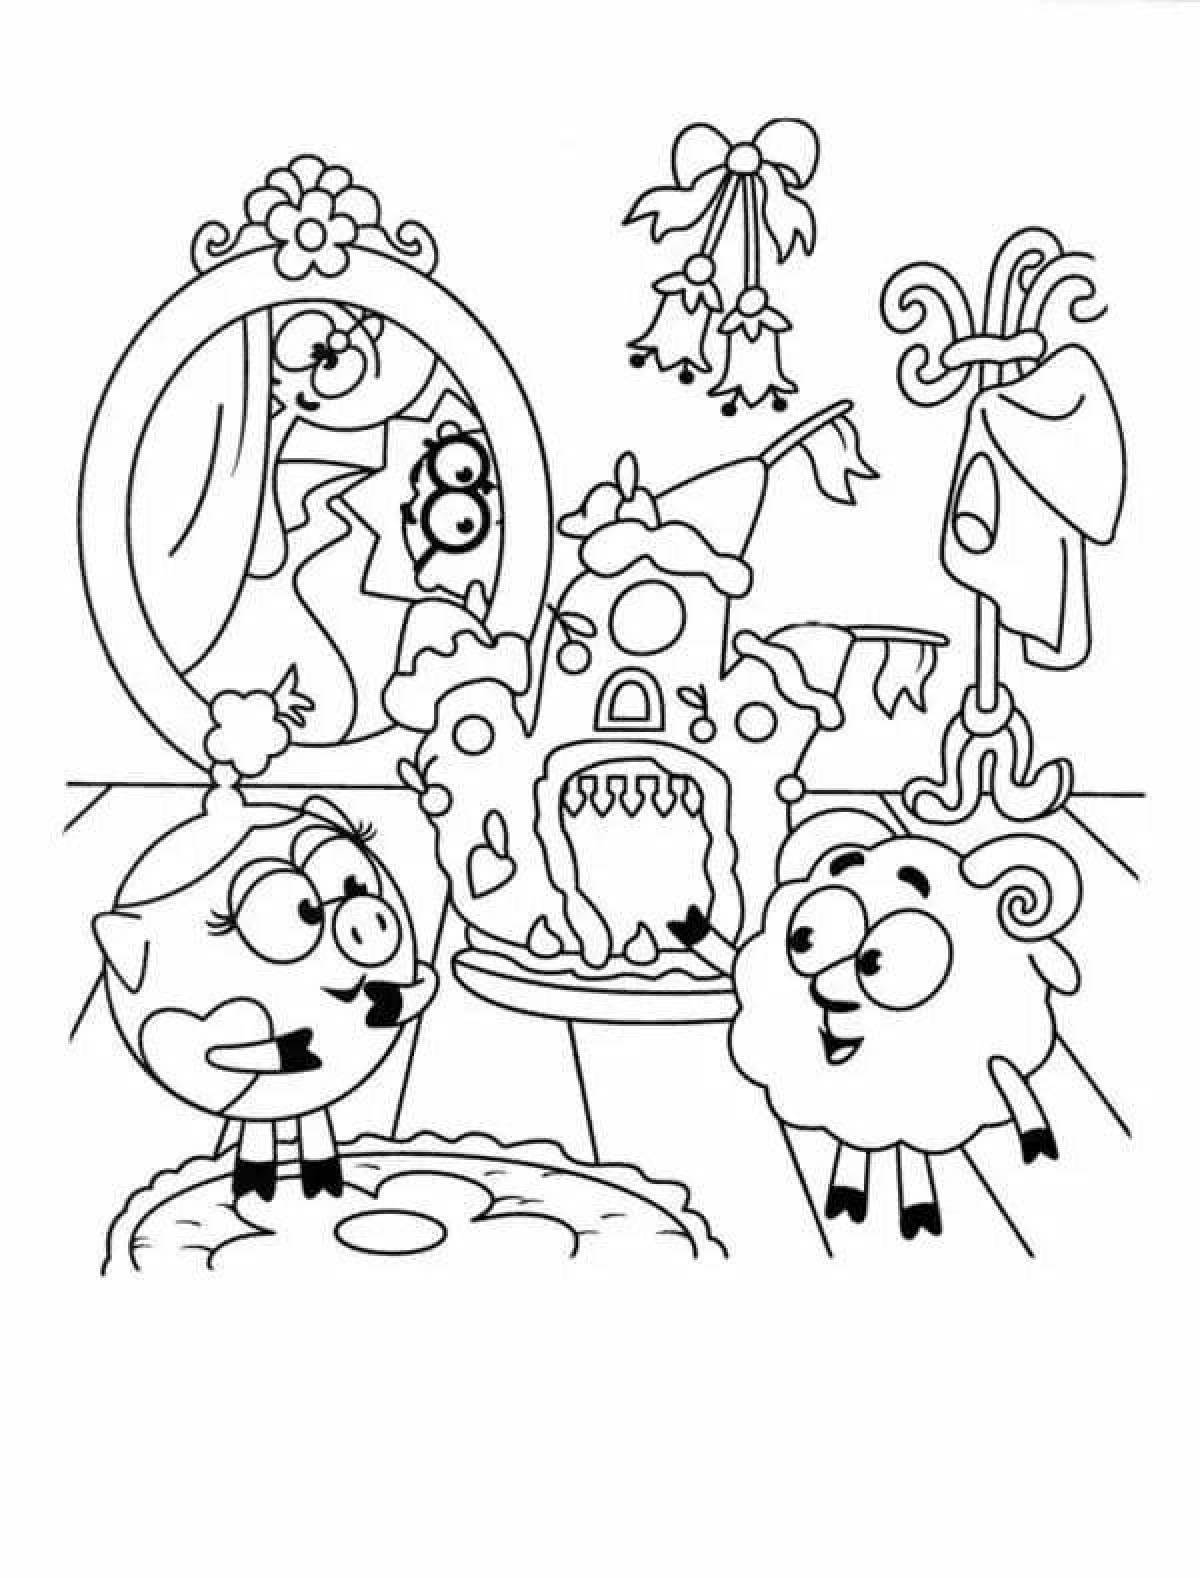 Delightful smeshariki coloring pages